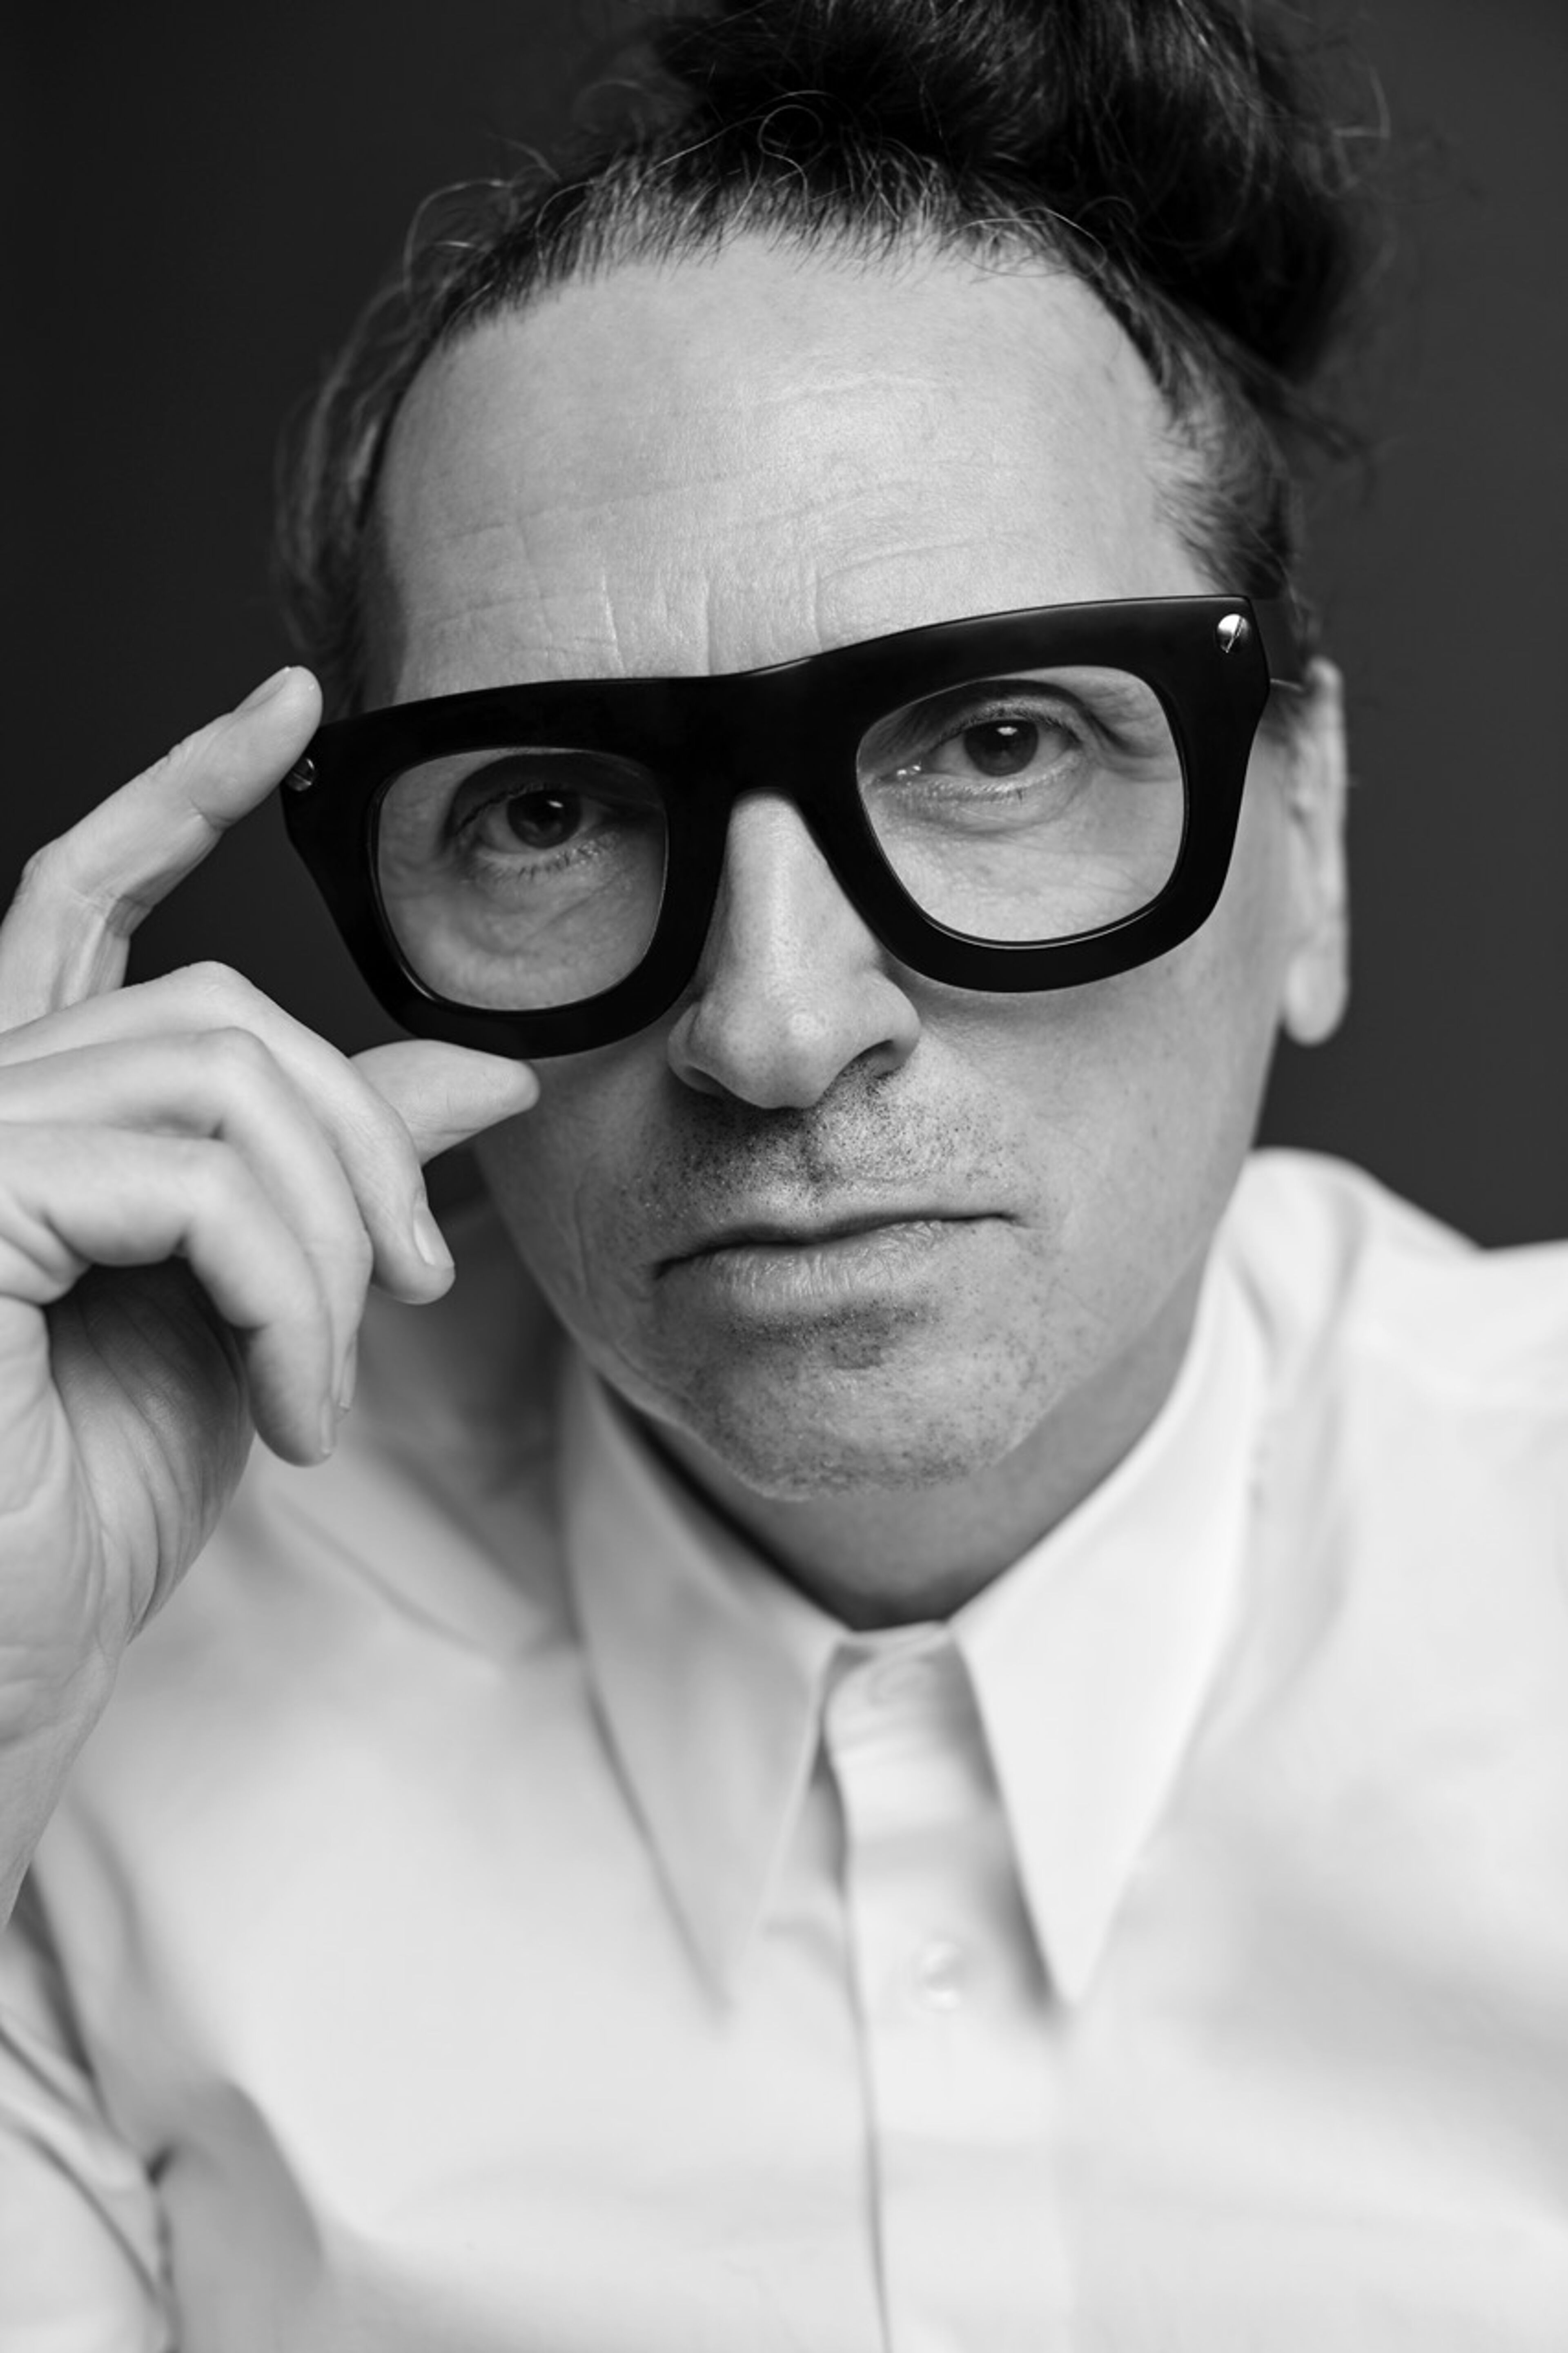 A black and white image capturing a man with distinctive large-framed glasses, looking intently towards the viewer.